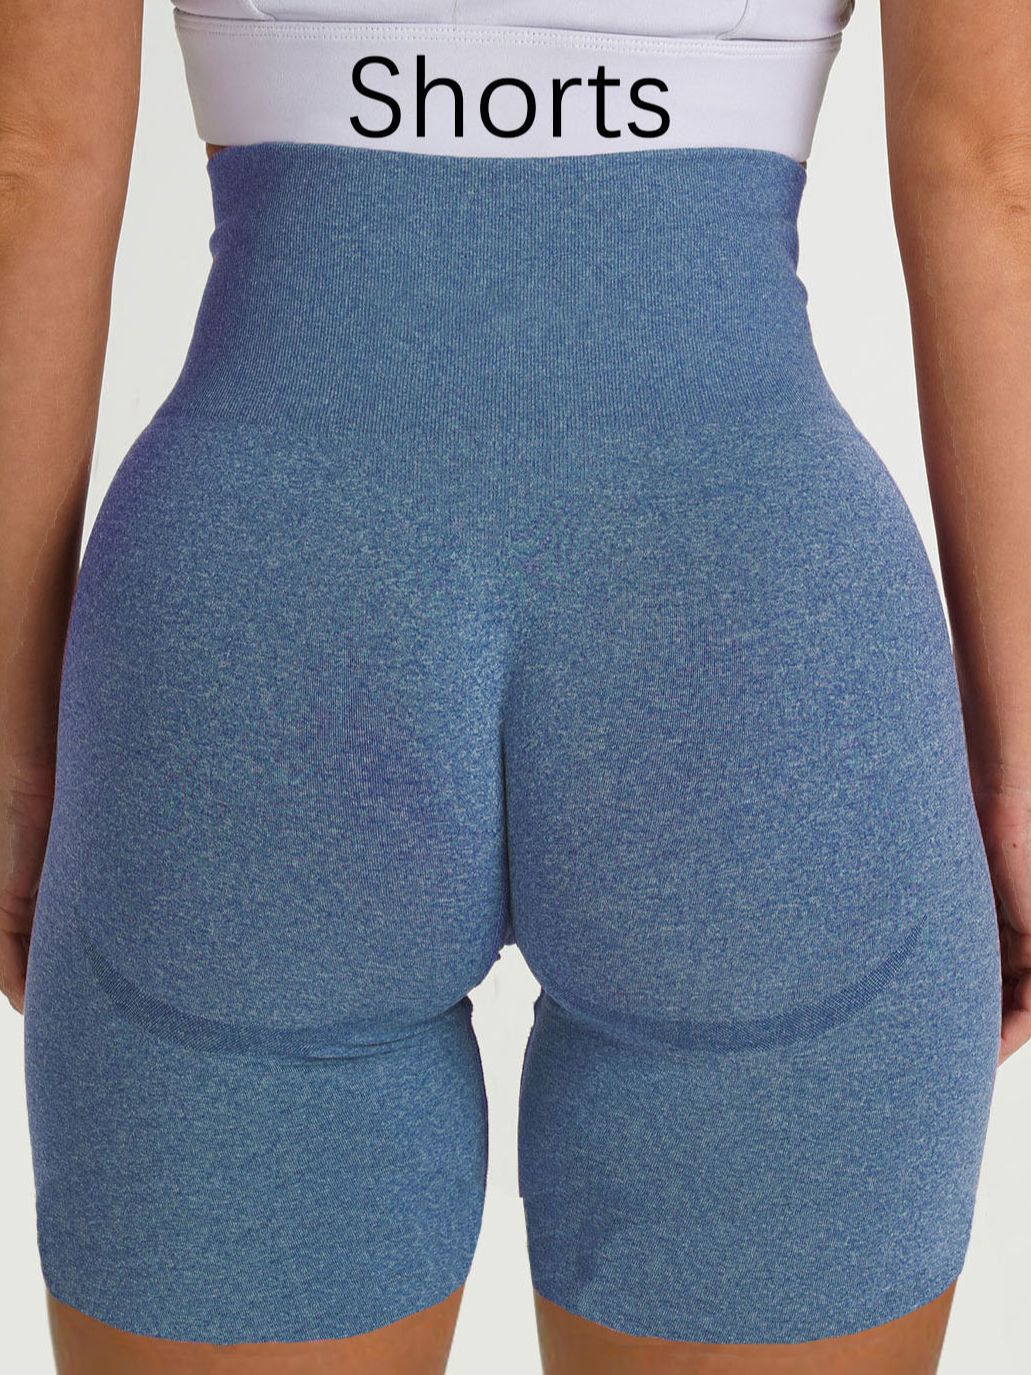 Seamless Leggings: High-Waisted Sport Shorts for Women, Fitness Tights, Trendy Gym Pants